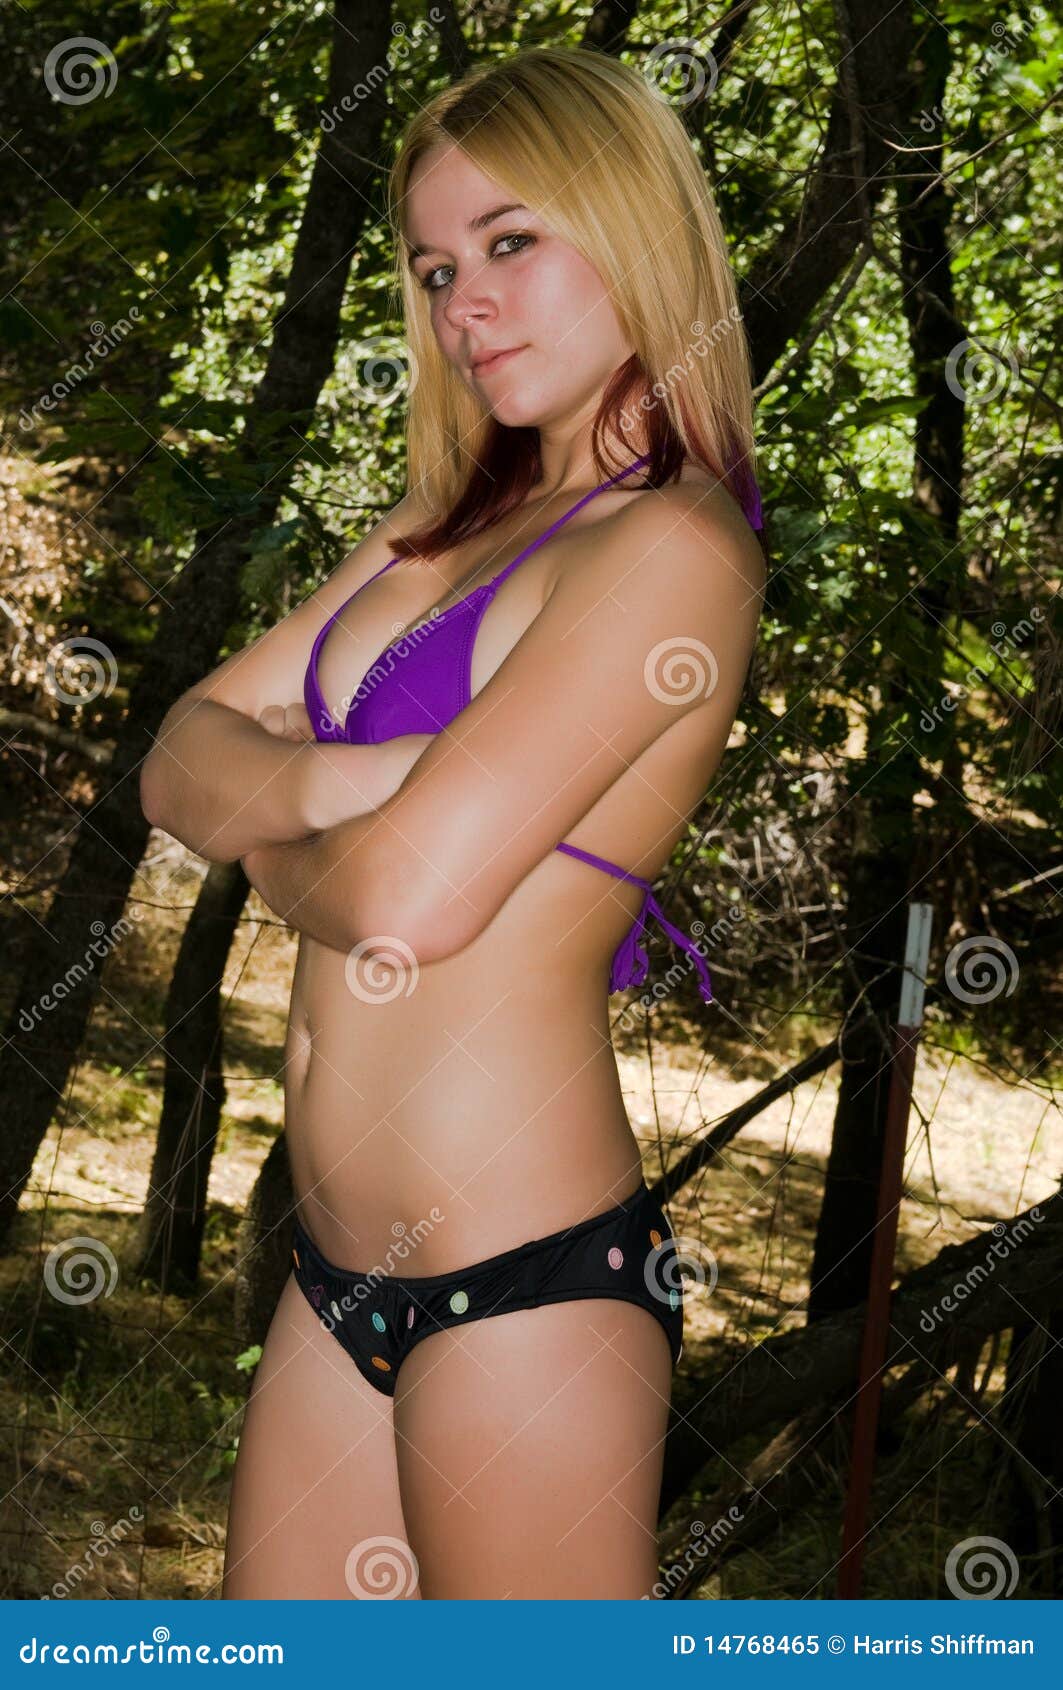 Blonde stock image picture